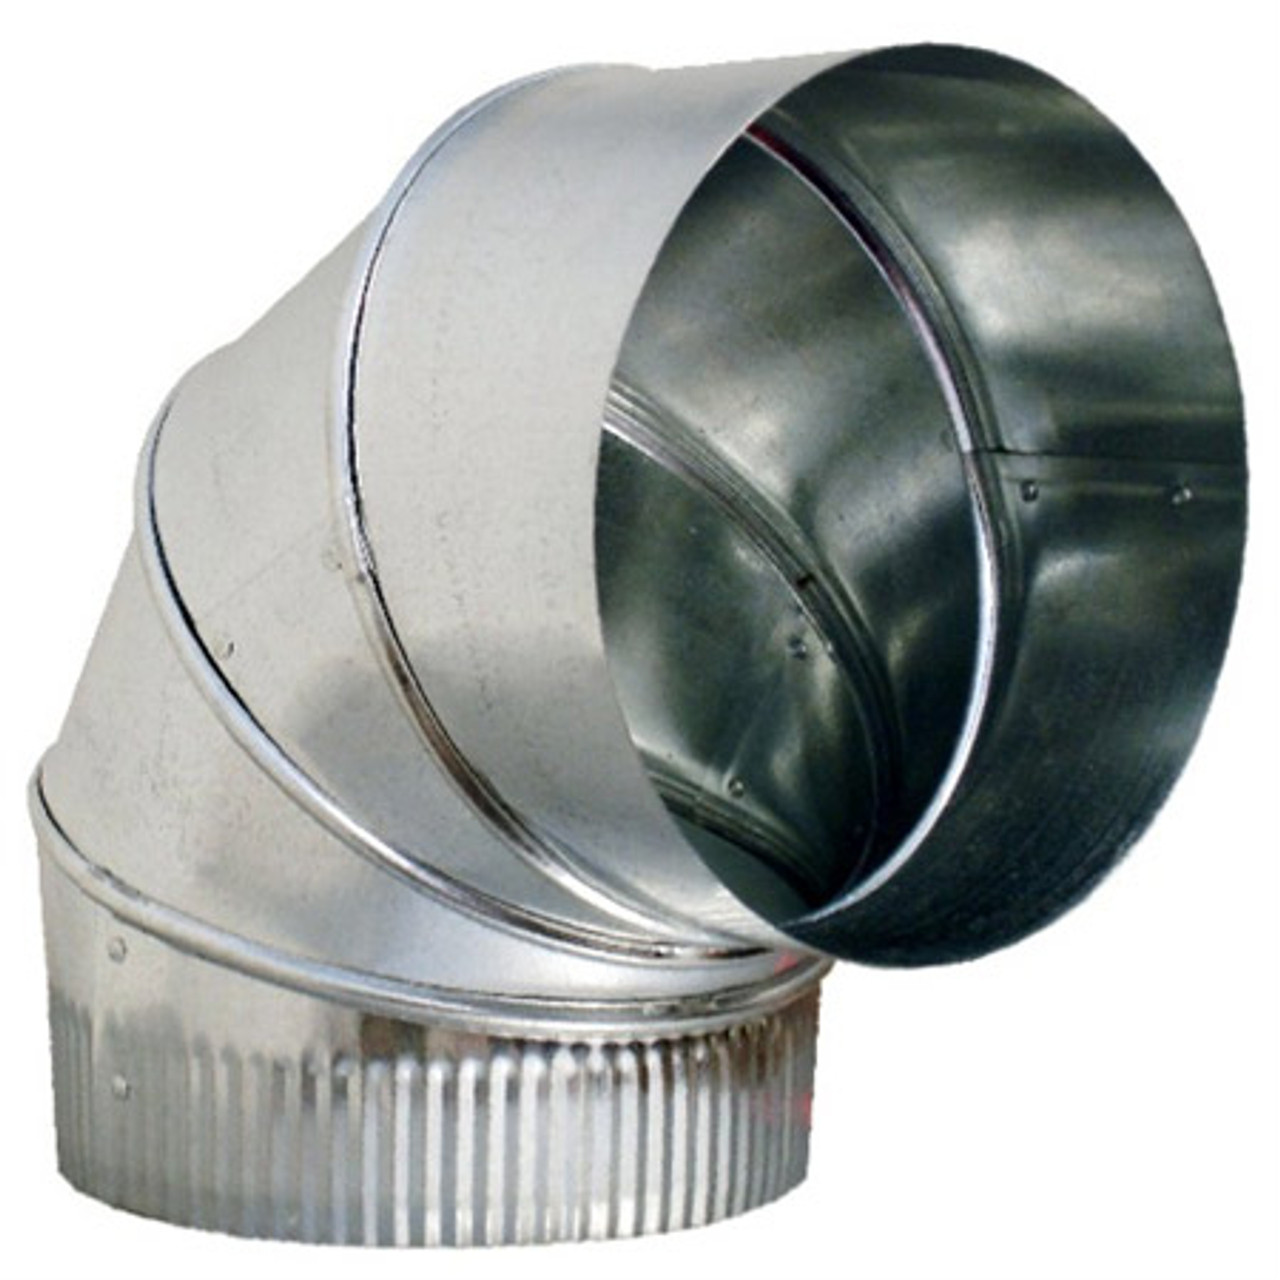 8 End Cap Round Duct Fitting 26 ga. 